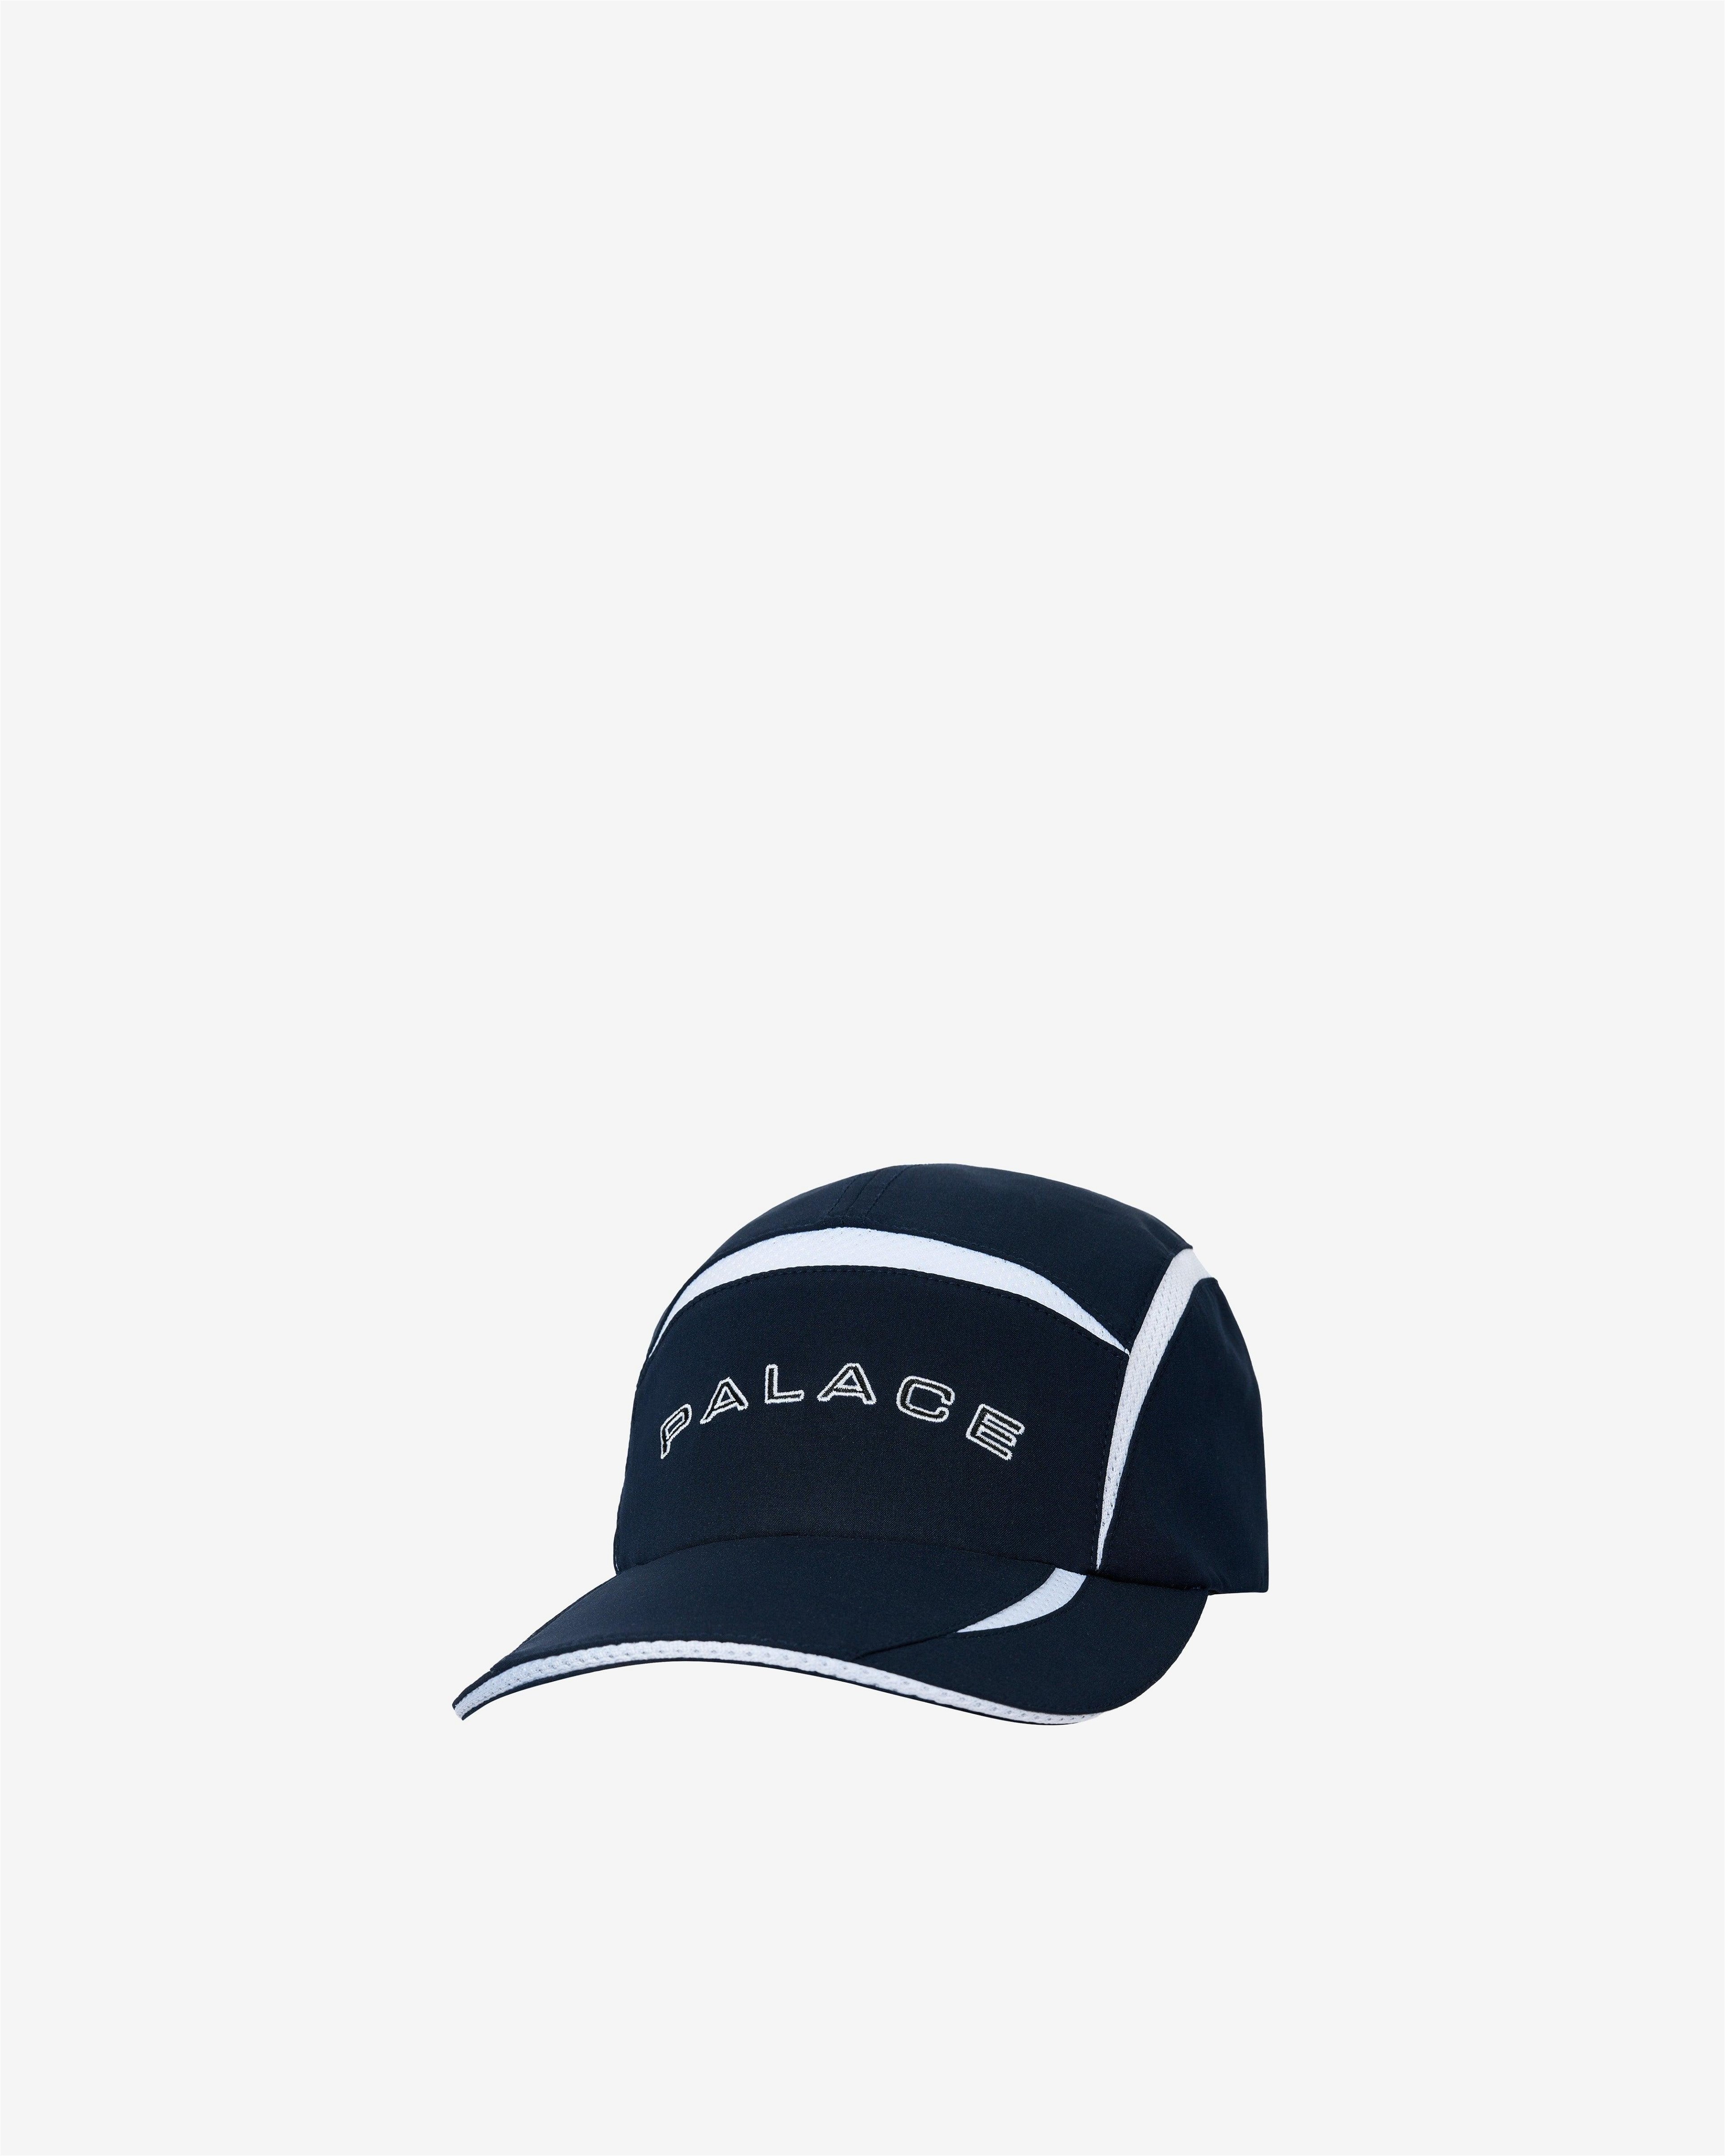 Palace - Men's Arc Shell Runner - (Navy) by PALACE